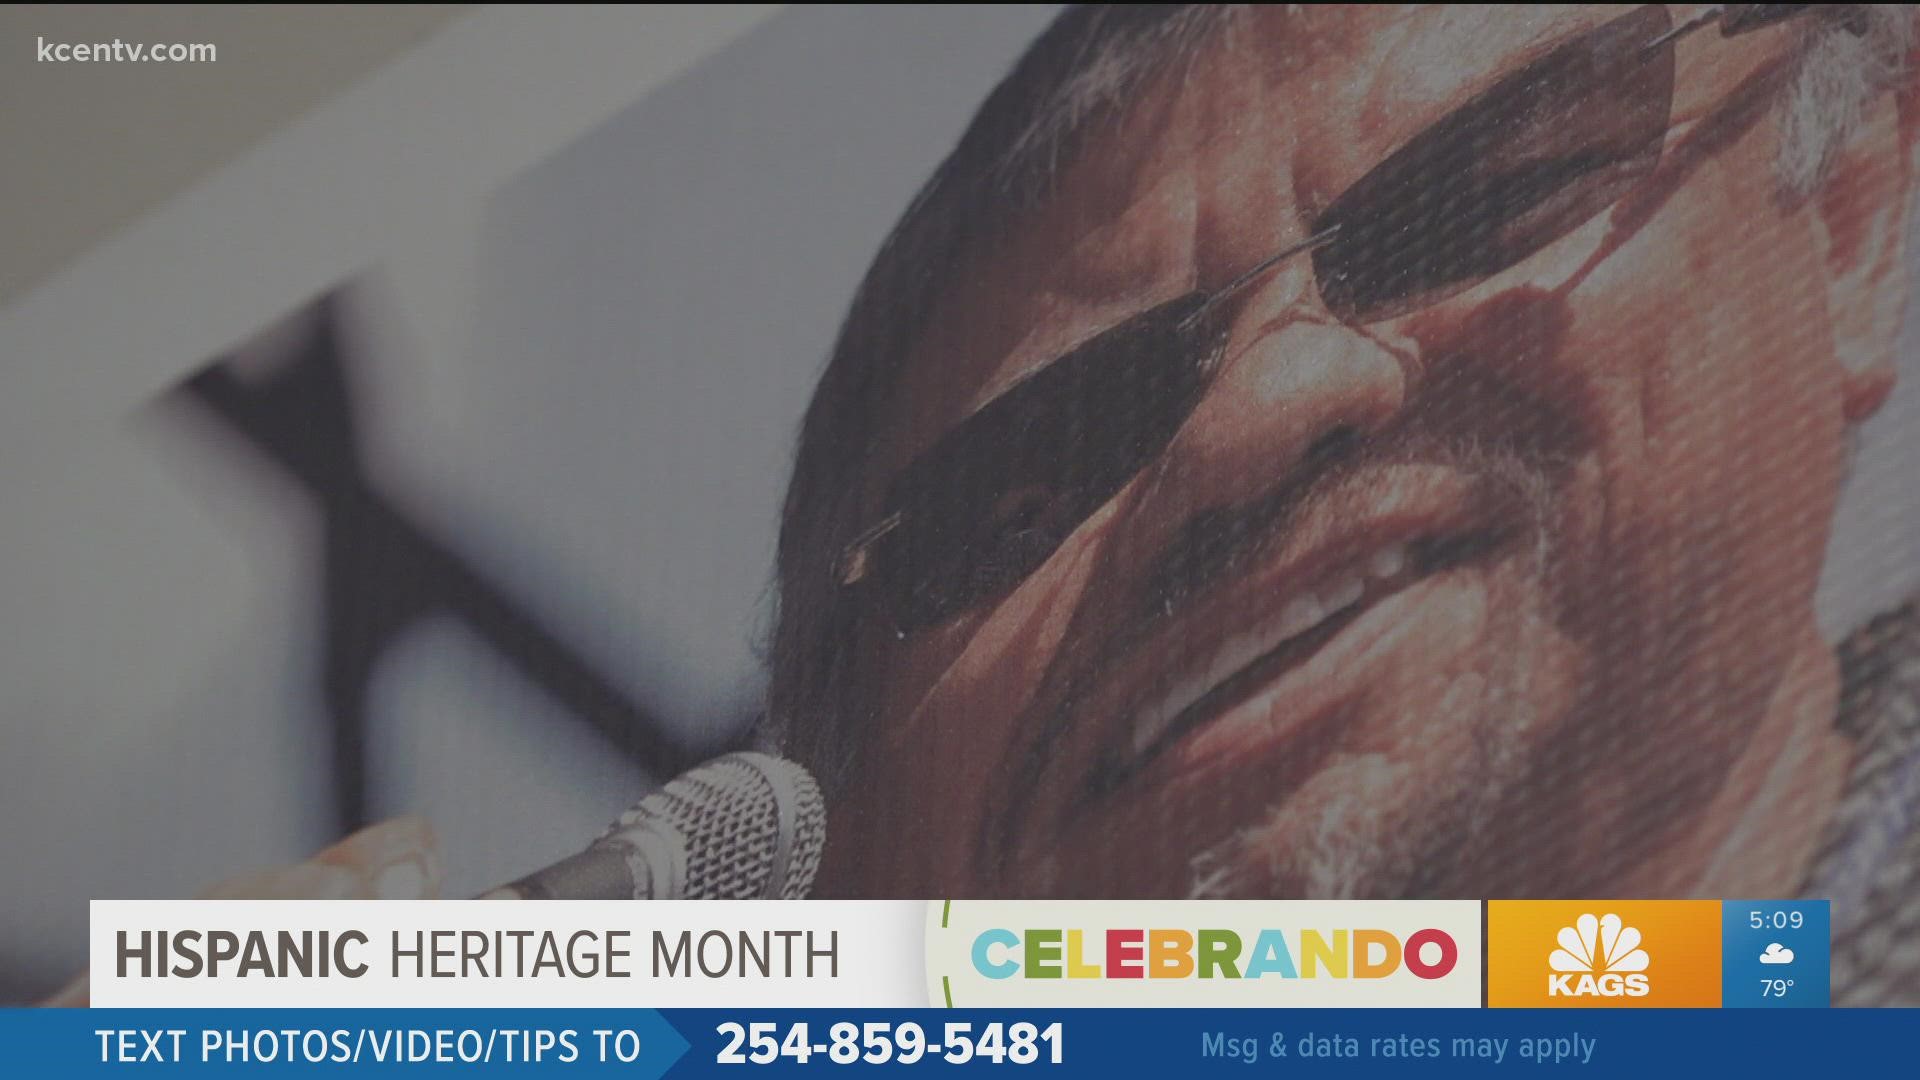 6News takes a closer look at a local museum celebrating Tejano star Little Joe Fernandez from Temple.